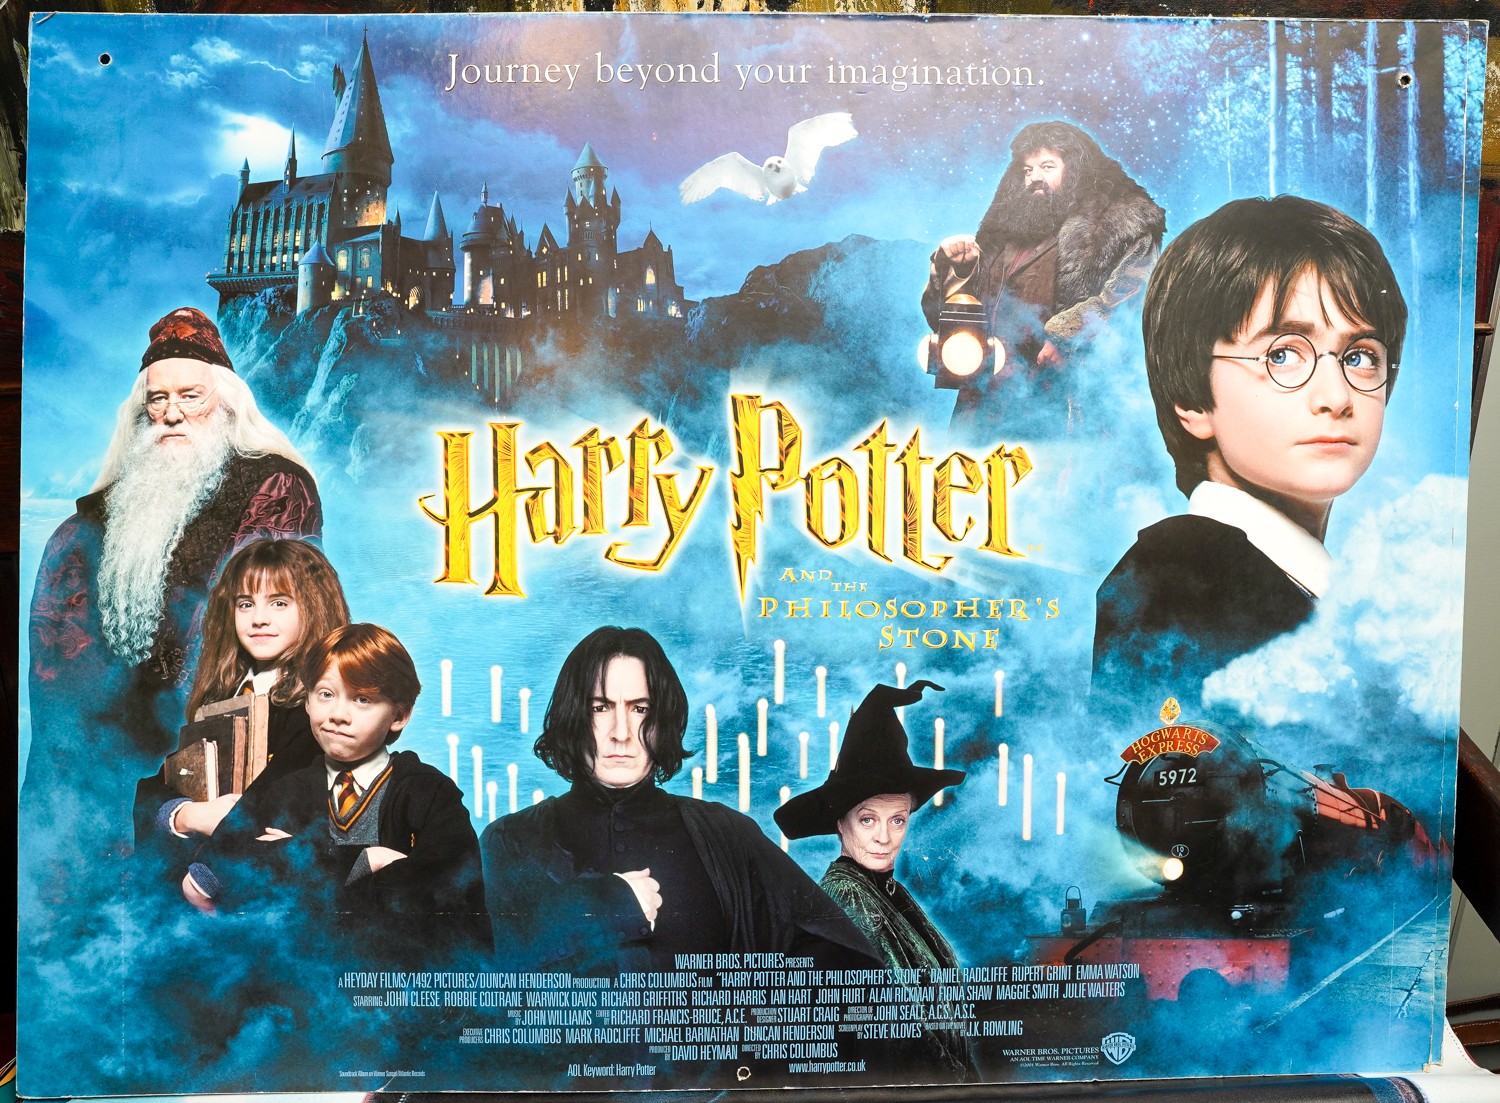 Harry Potter poster. A large cardboard advertising poster for Harry Potter and the Philosophers